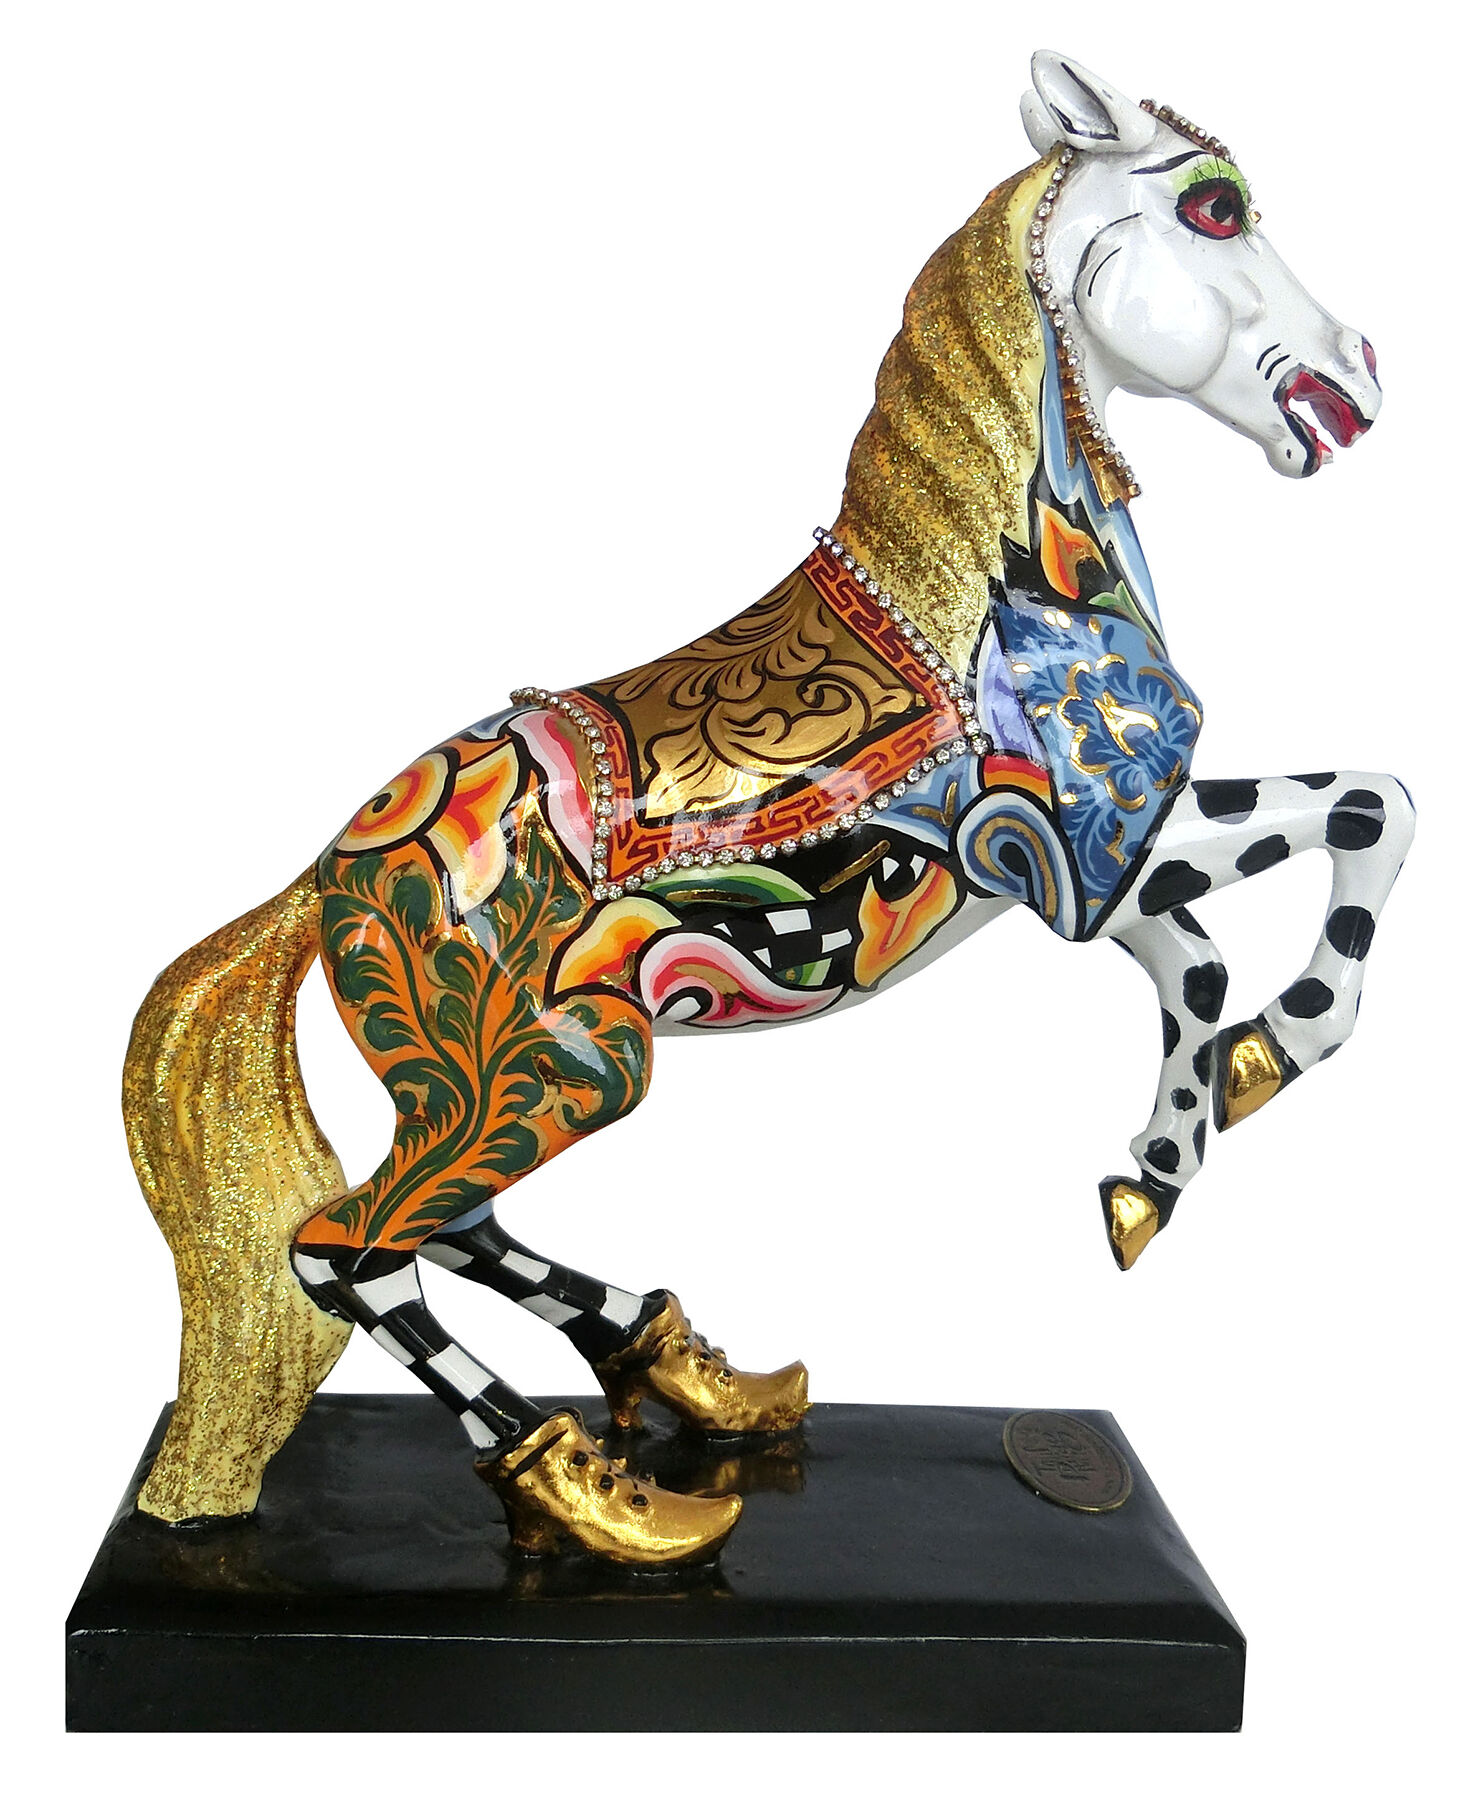 Horse sculpture "White Champion", cast by Tom's Drag